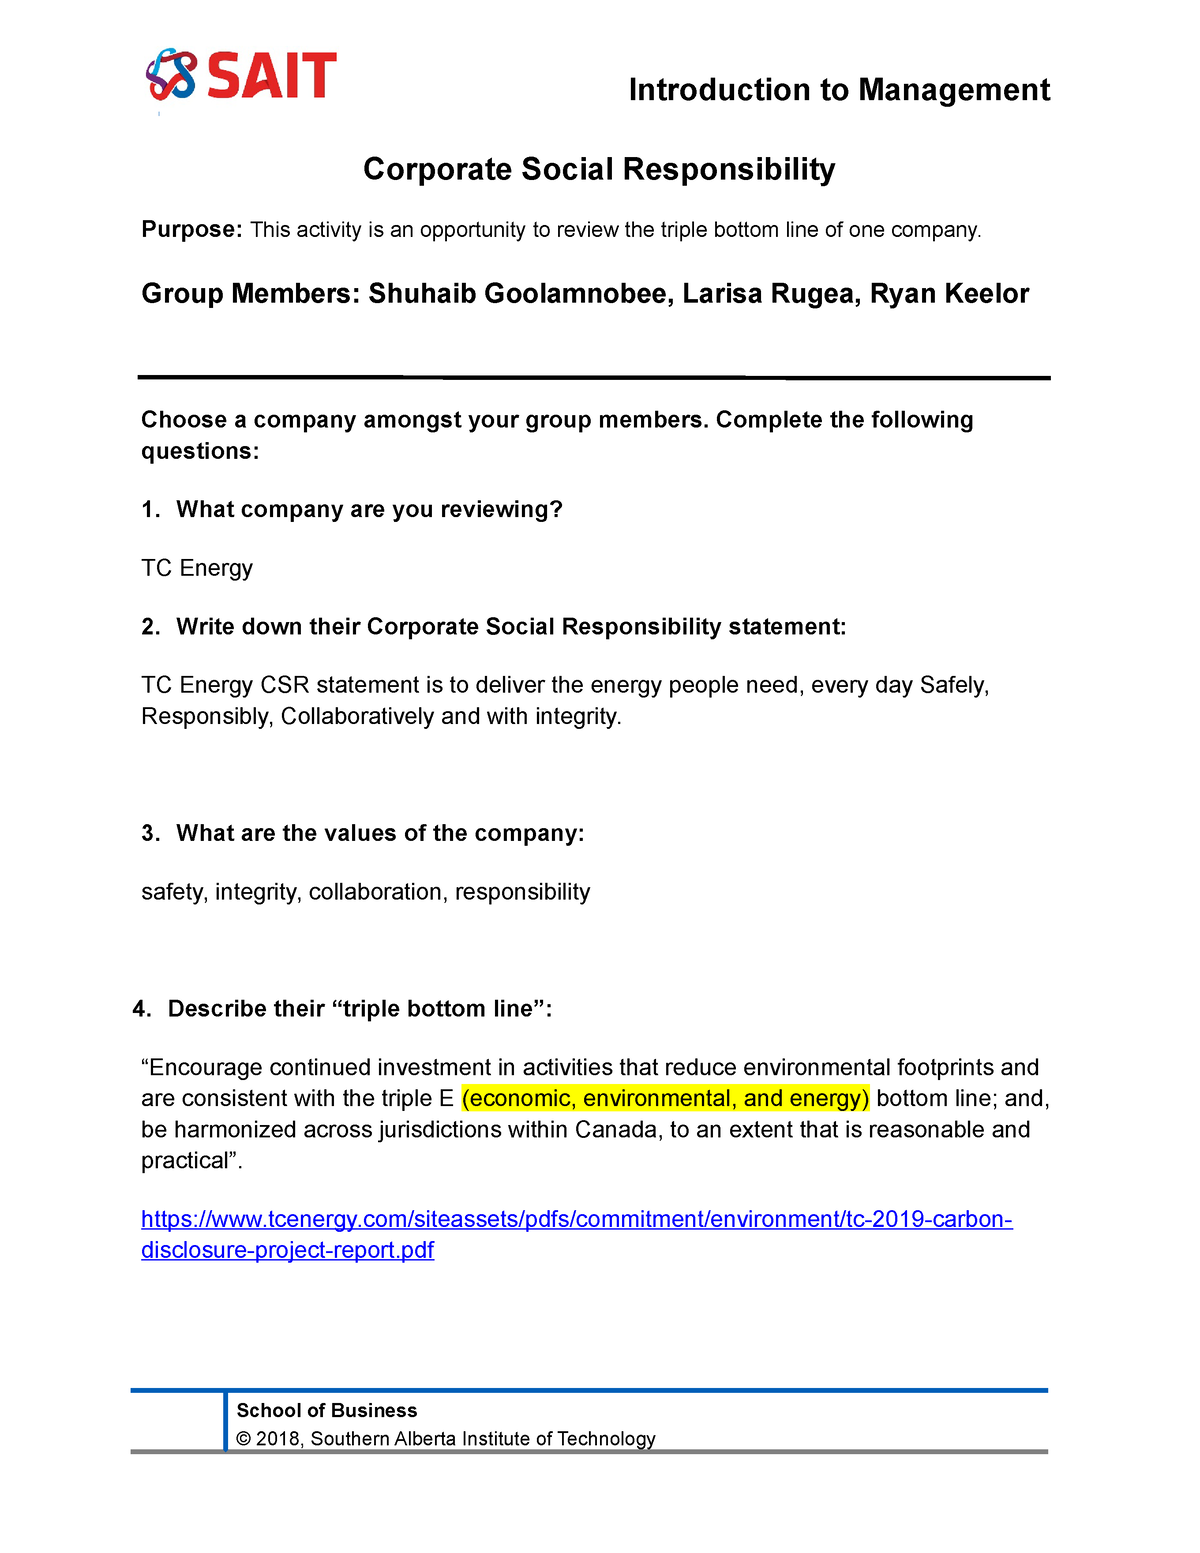 assignment worksheet 18 2 corporate formation and powers